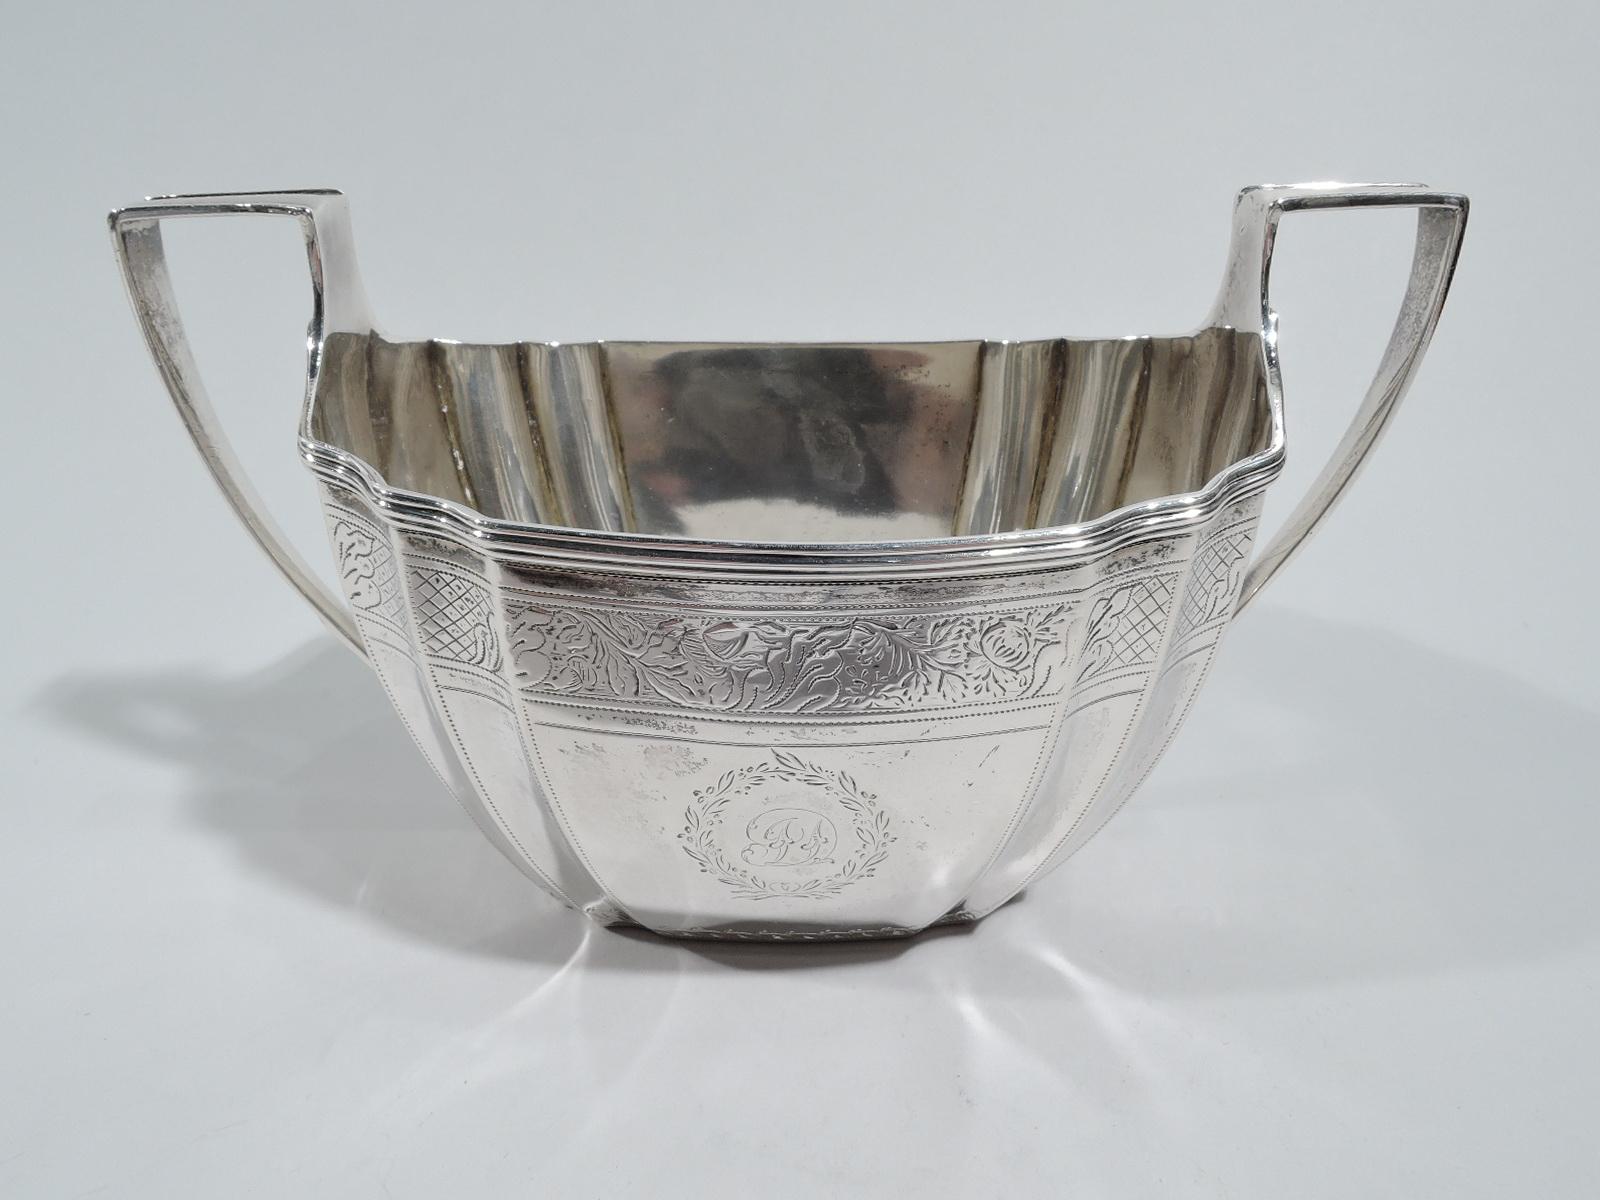 George III sterling silver sugar. Made by McHattie & Fenwick in Edinburgh in 1804. Tapering and curved sides with corner flutes and high scroll bracket handles. Engraved ornamental borders and 2 wreath frames of which one engraved with script